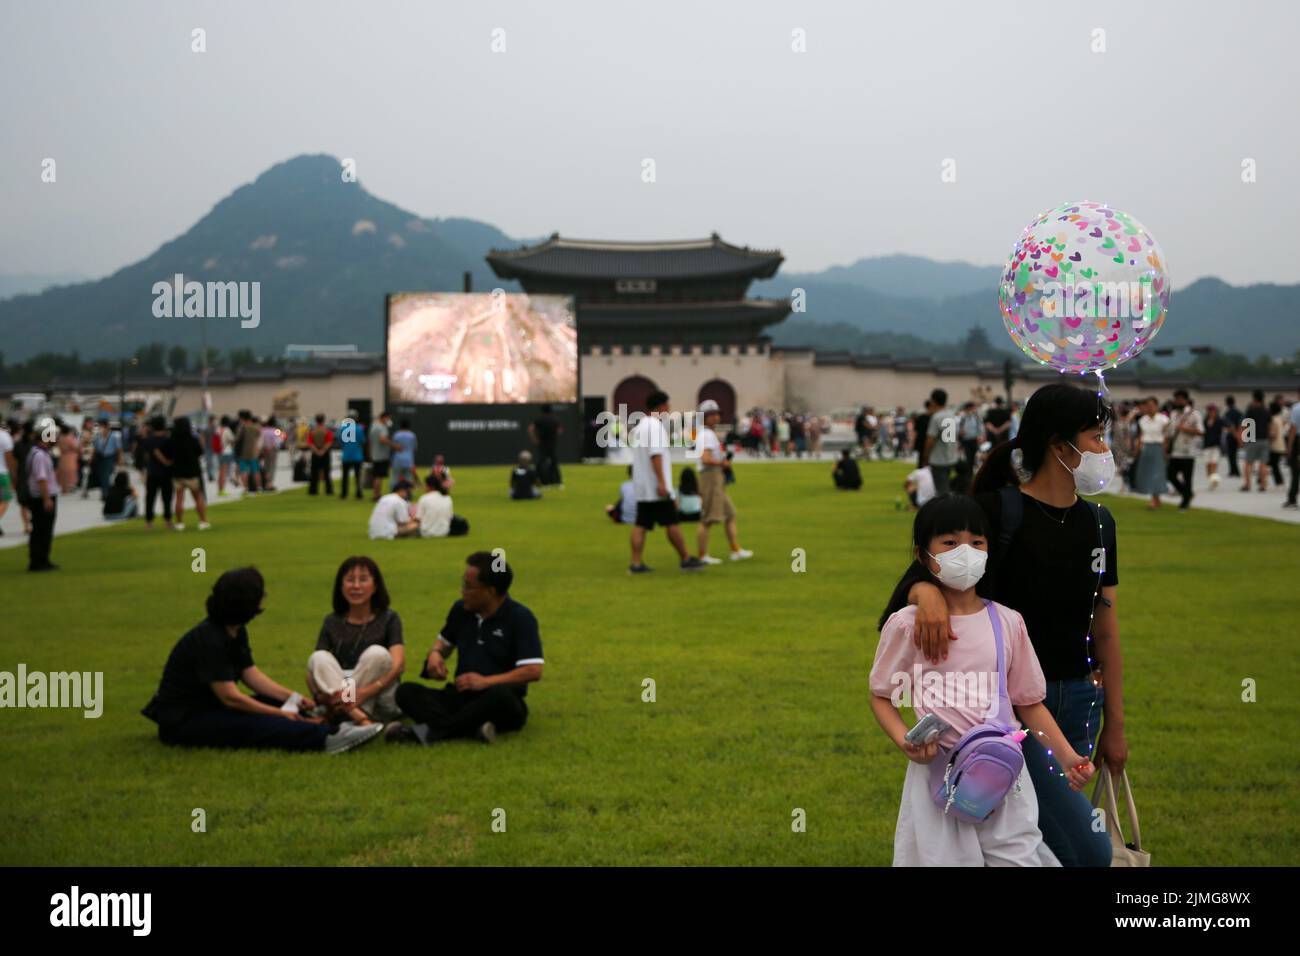 Seoul, South Korea. 6th Aug, 2022. Visitors tour and rest on a lawn at the Gwanghwamun Square in Seoul, South Korea, Aug. 6, 2022. Gwanghwamun Square, a major landmark in Seoul, opened to the public Saturday after nearly two years of renovation. Credit: Wang Yiliang/Xinhua/Alamy Live News Stock Photo